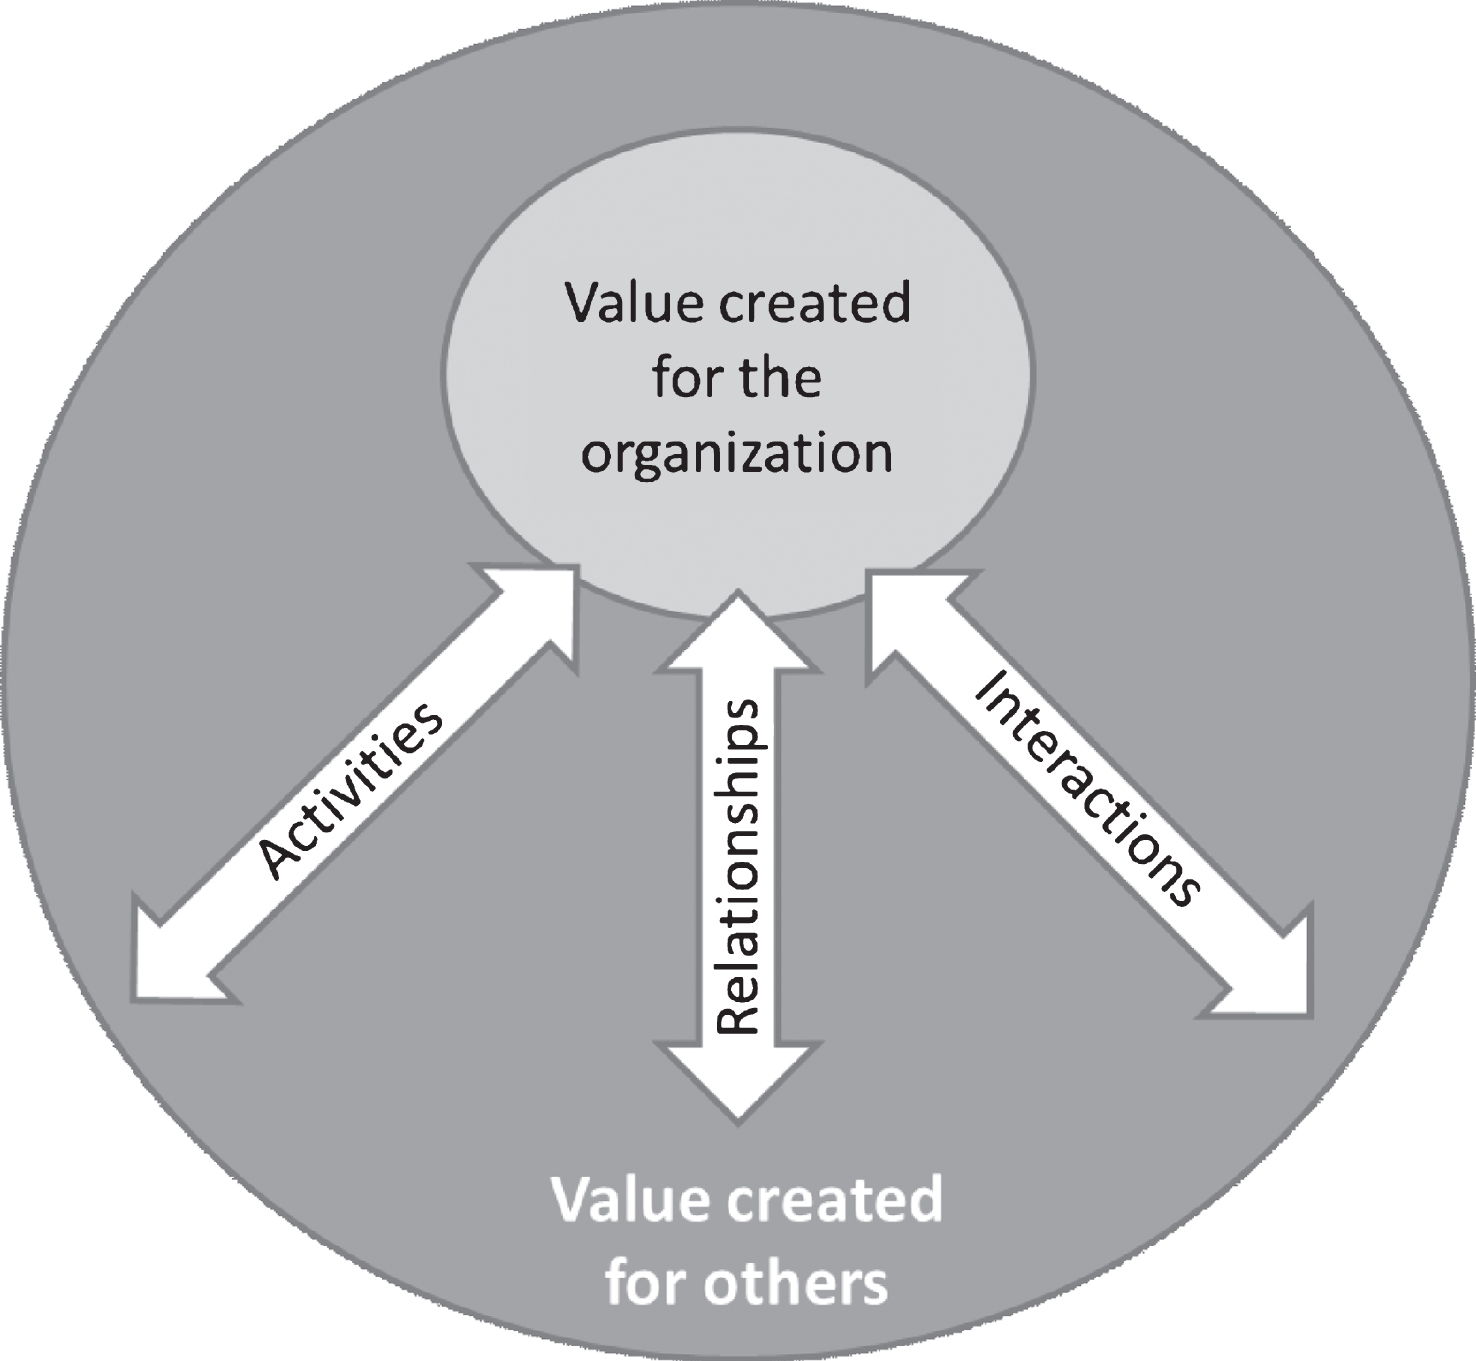 Value created for the organization and for others. Sources: [43:10].